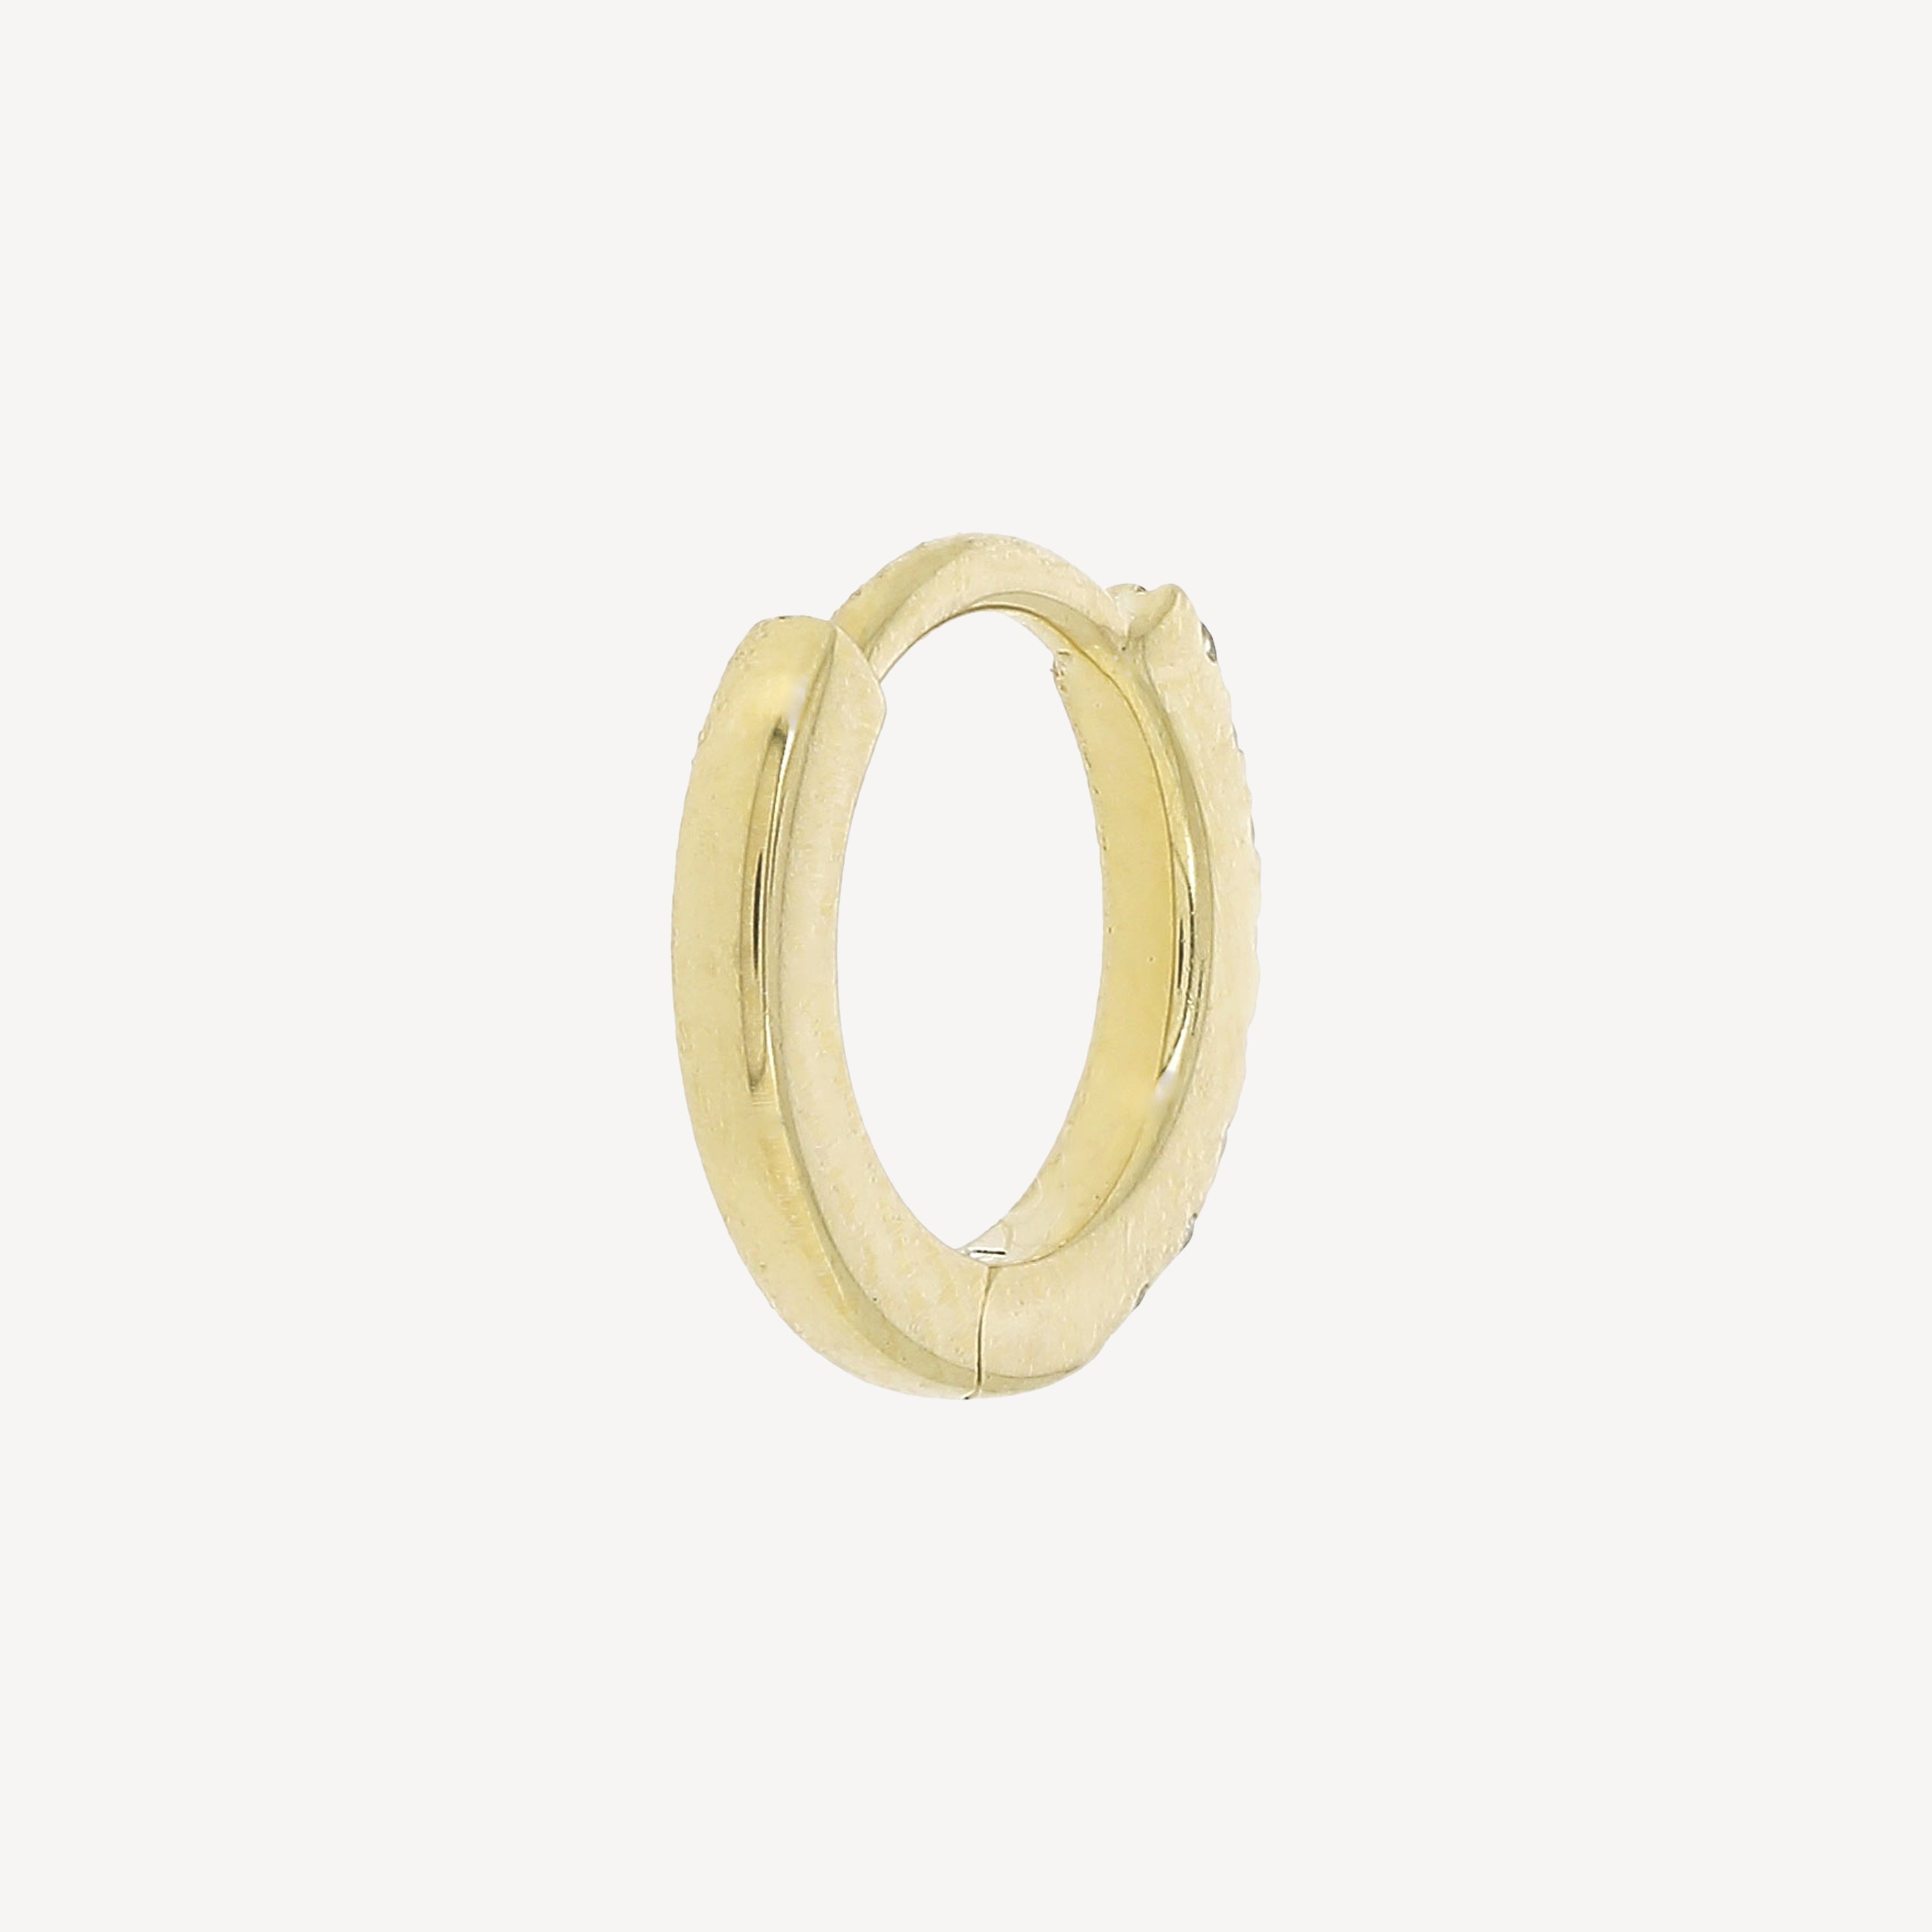 6.5mm Half Paved Yellow Gold Hoop